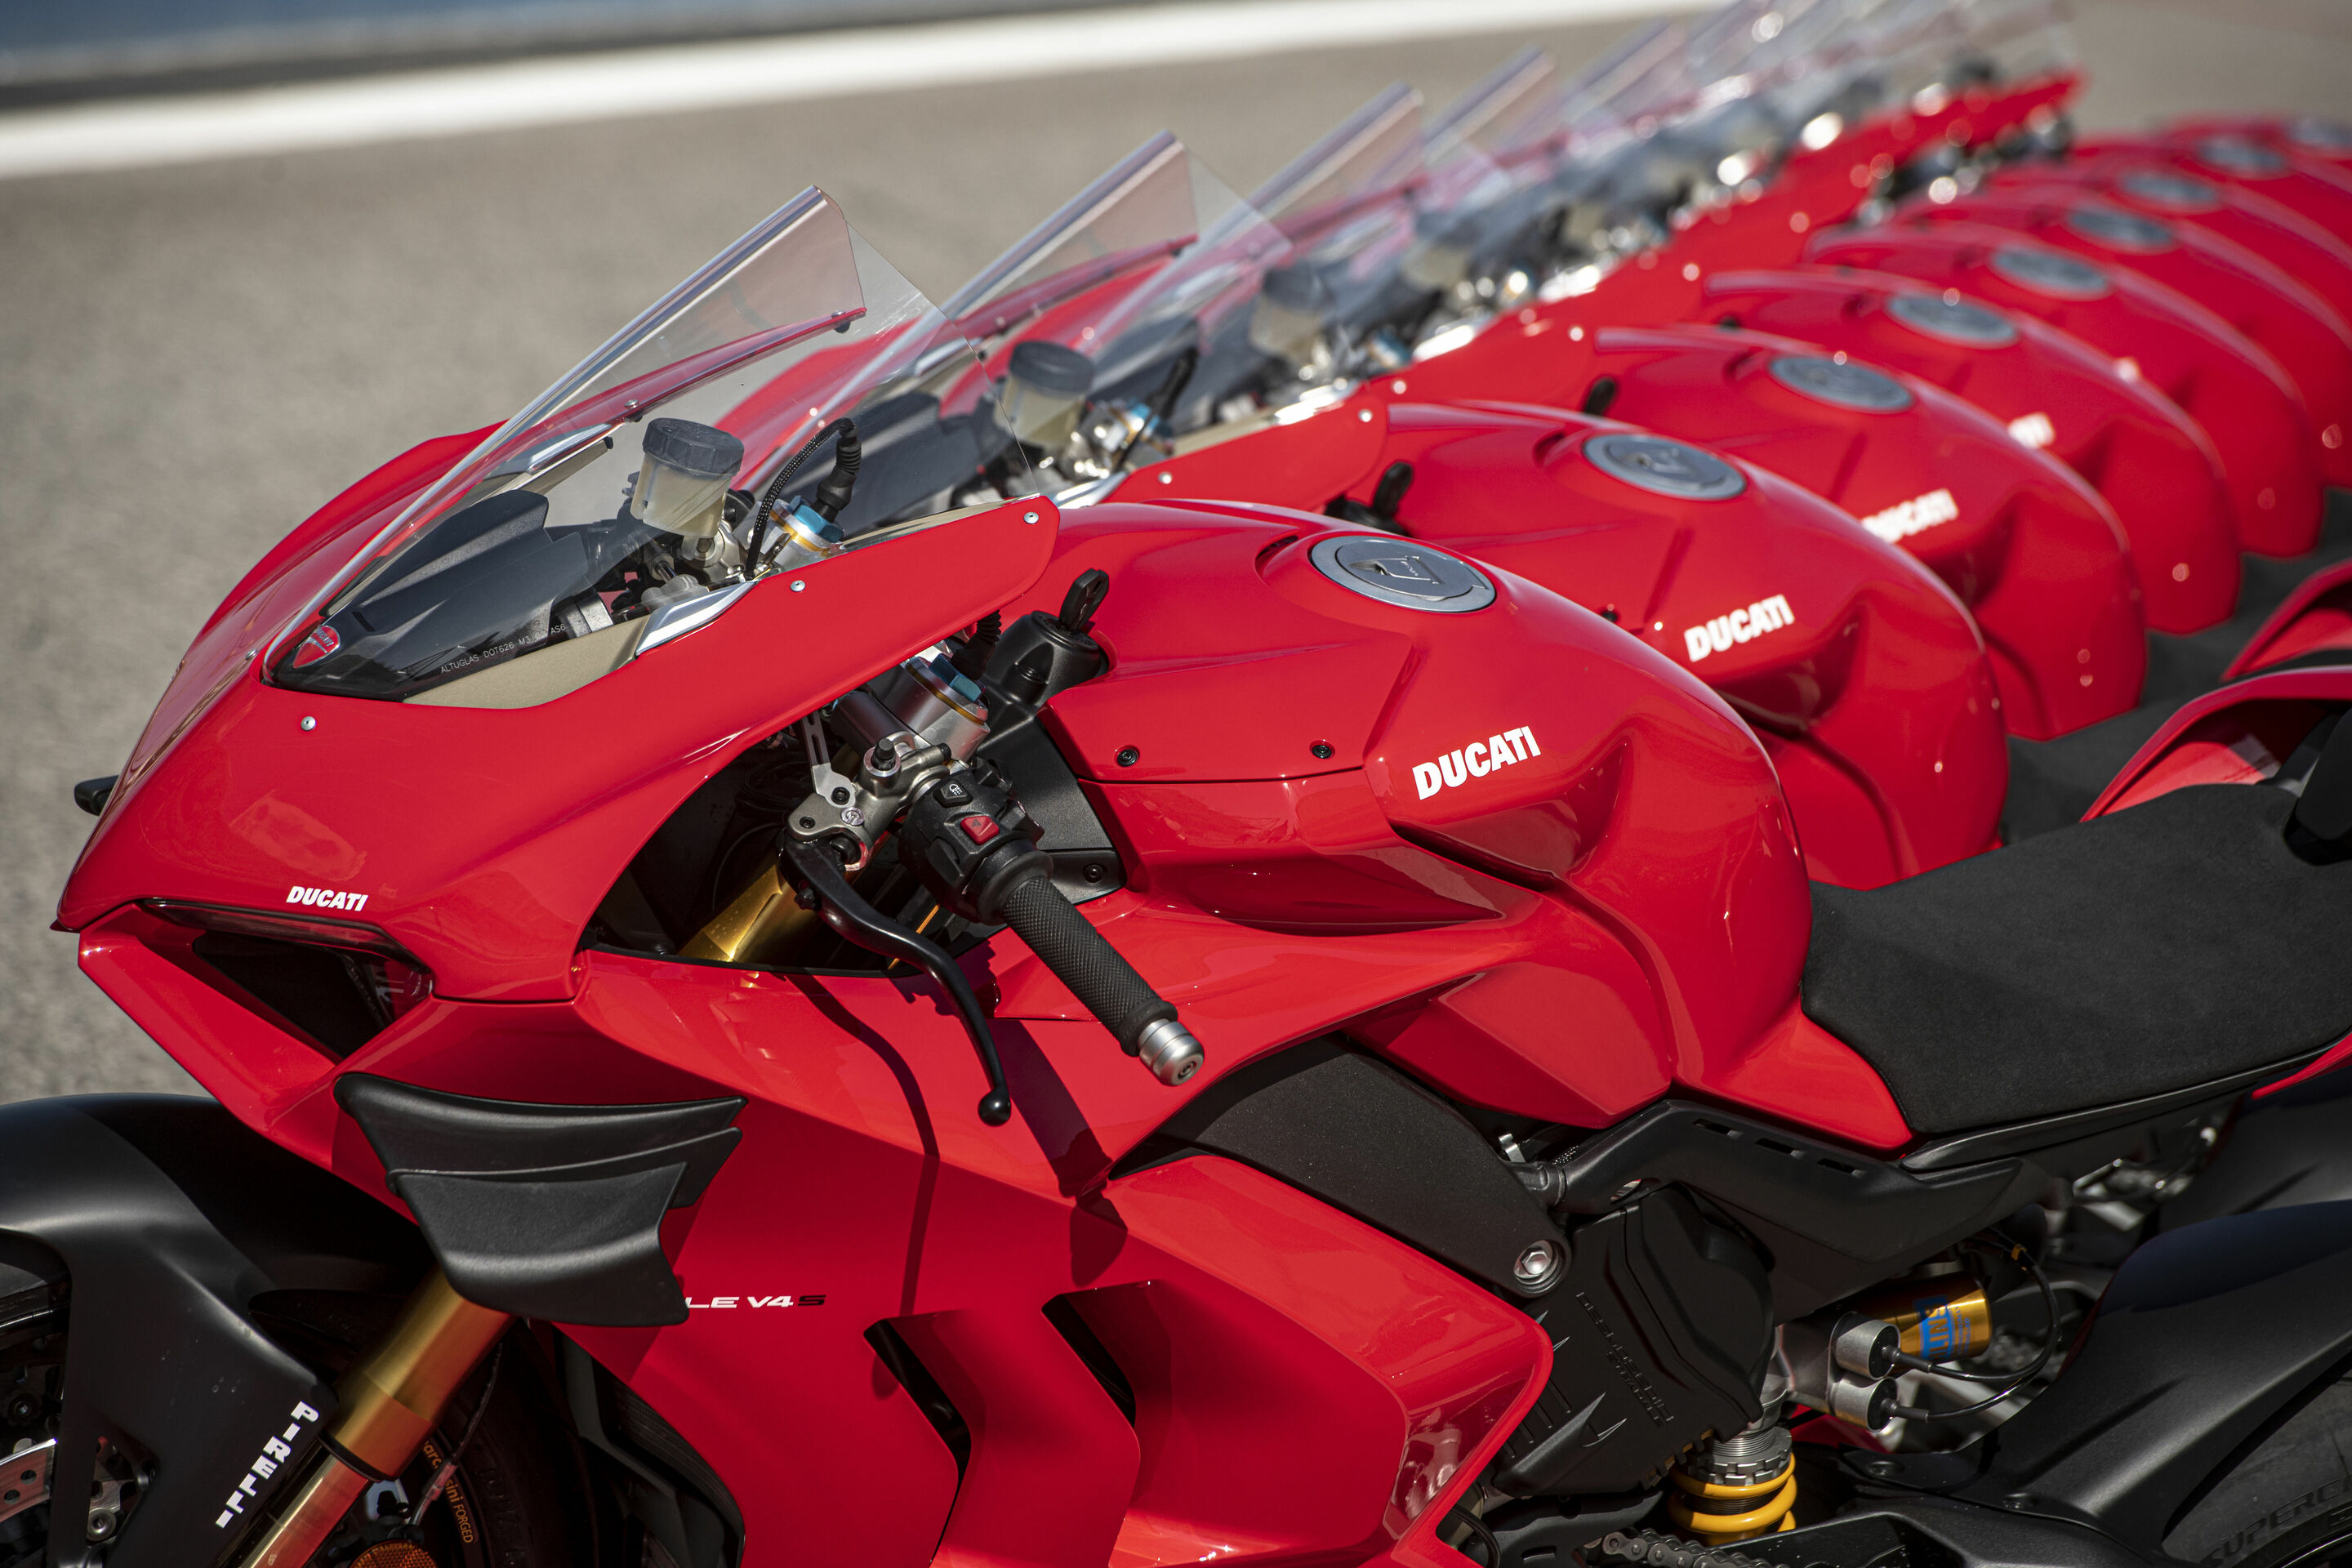 Ducati ends an extraordinary year: with 61,562 motorcycles